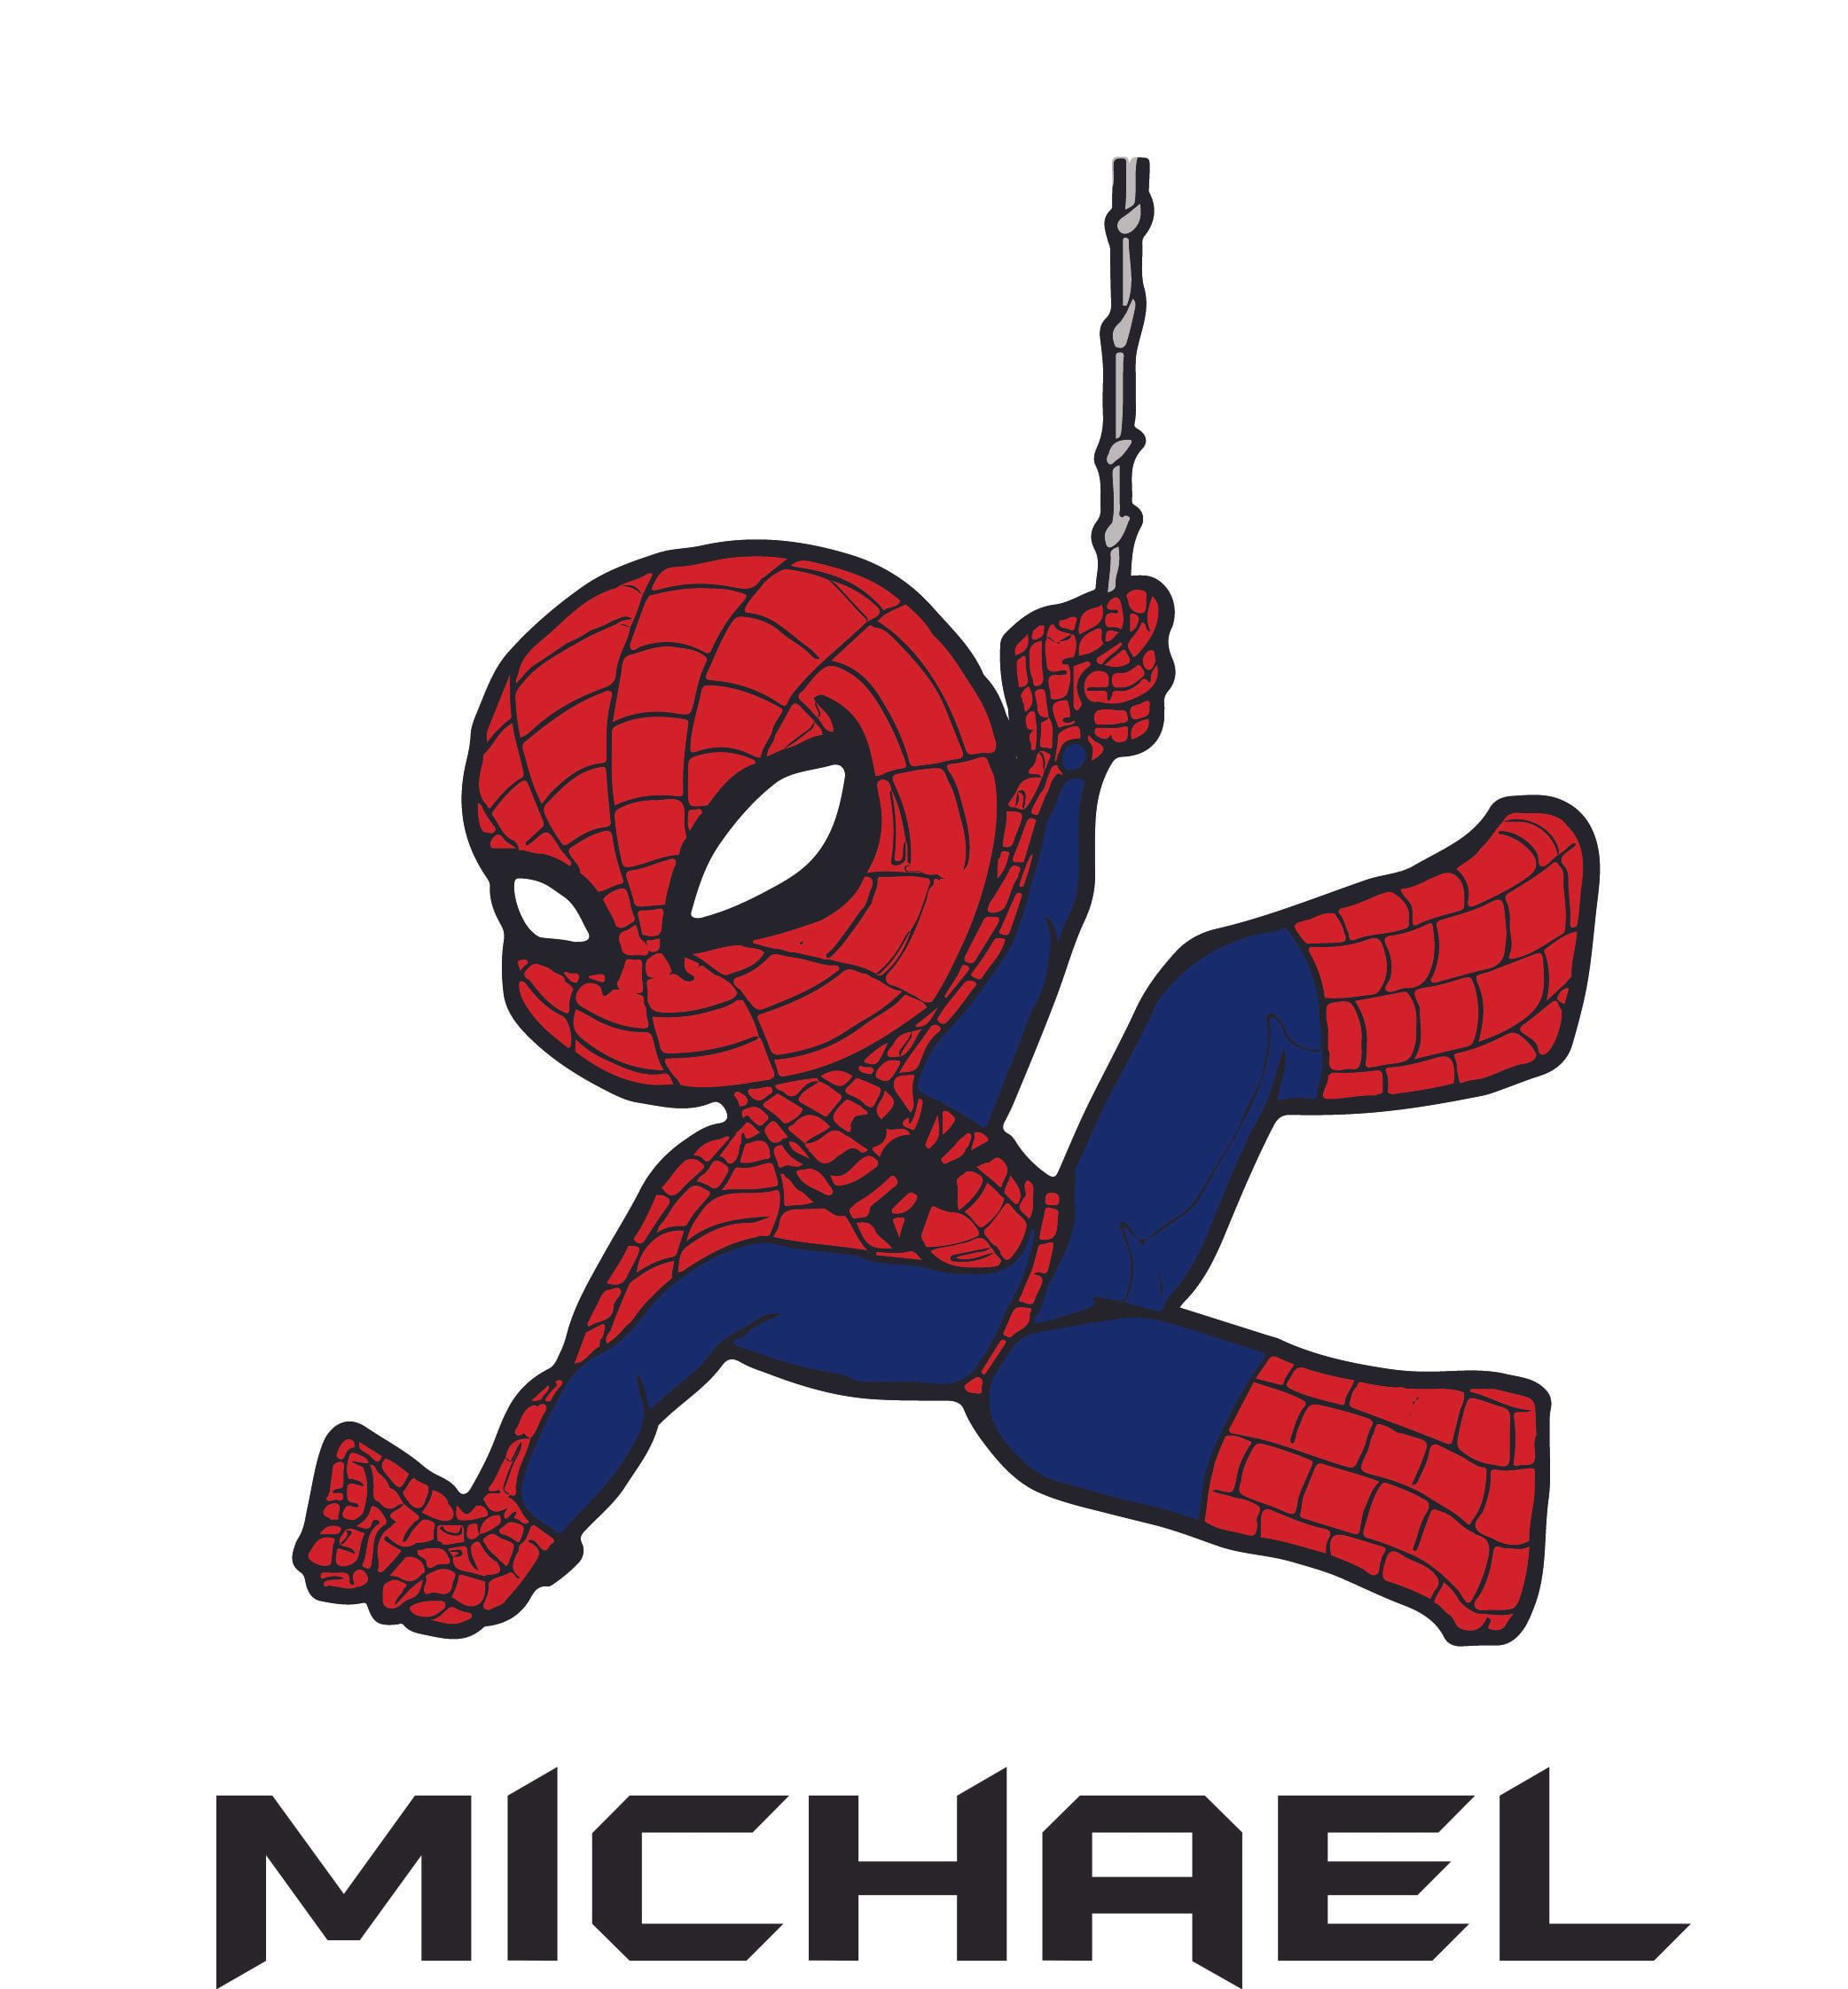 Lego Marvel Spiderman door sticker PERSONALISED WITH YOUR NAME 